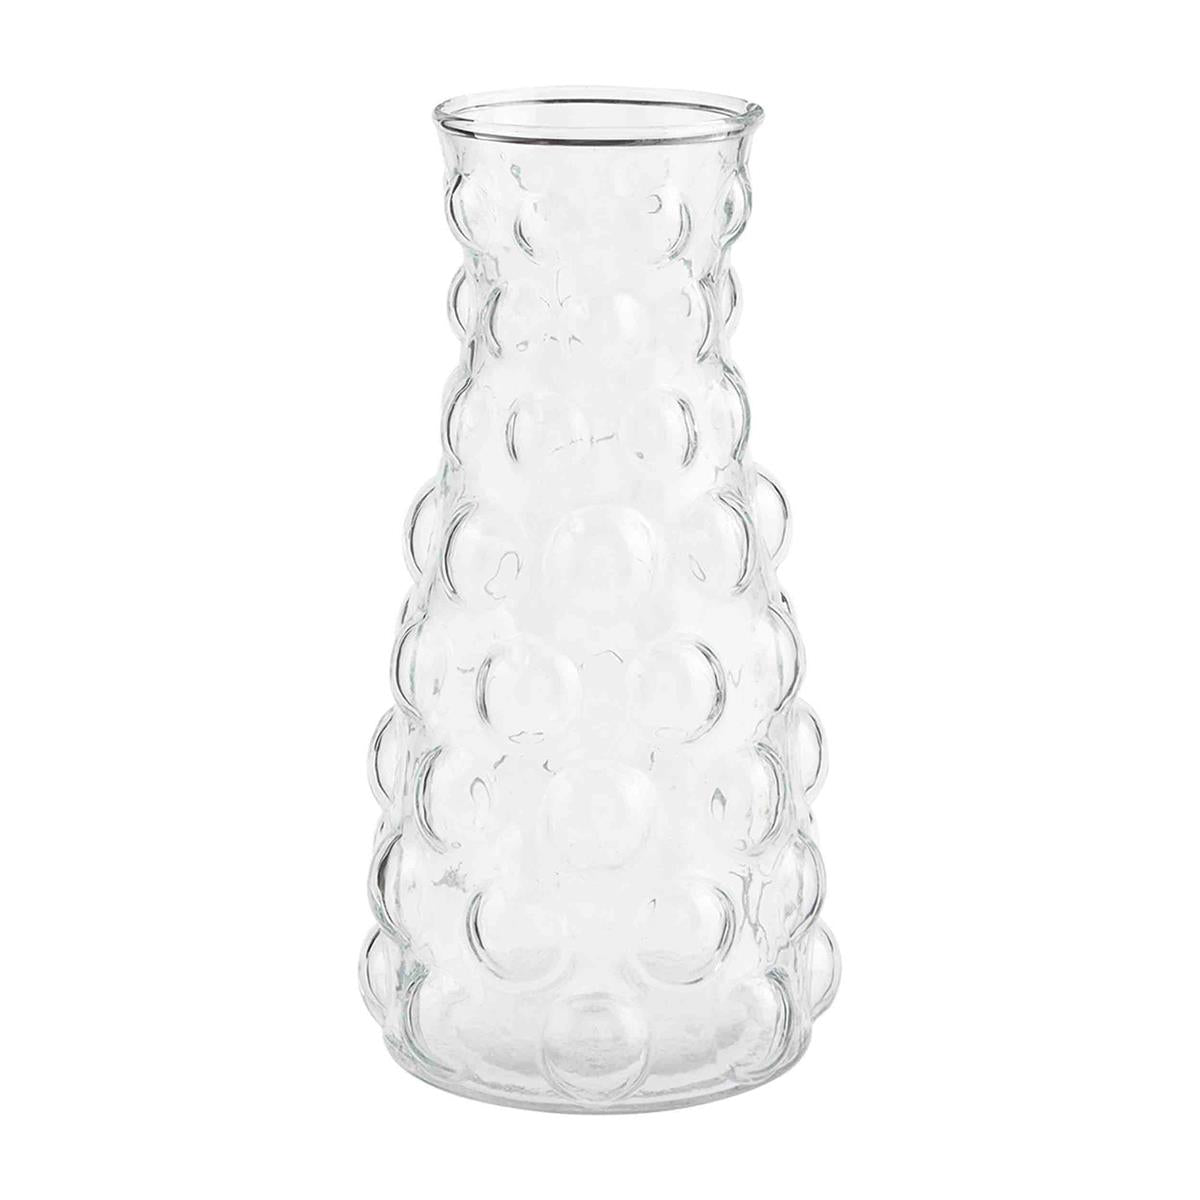 small hobnail glass vase against a white background